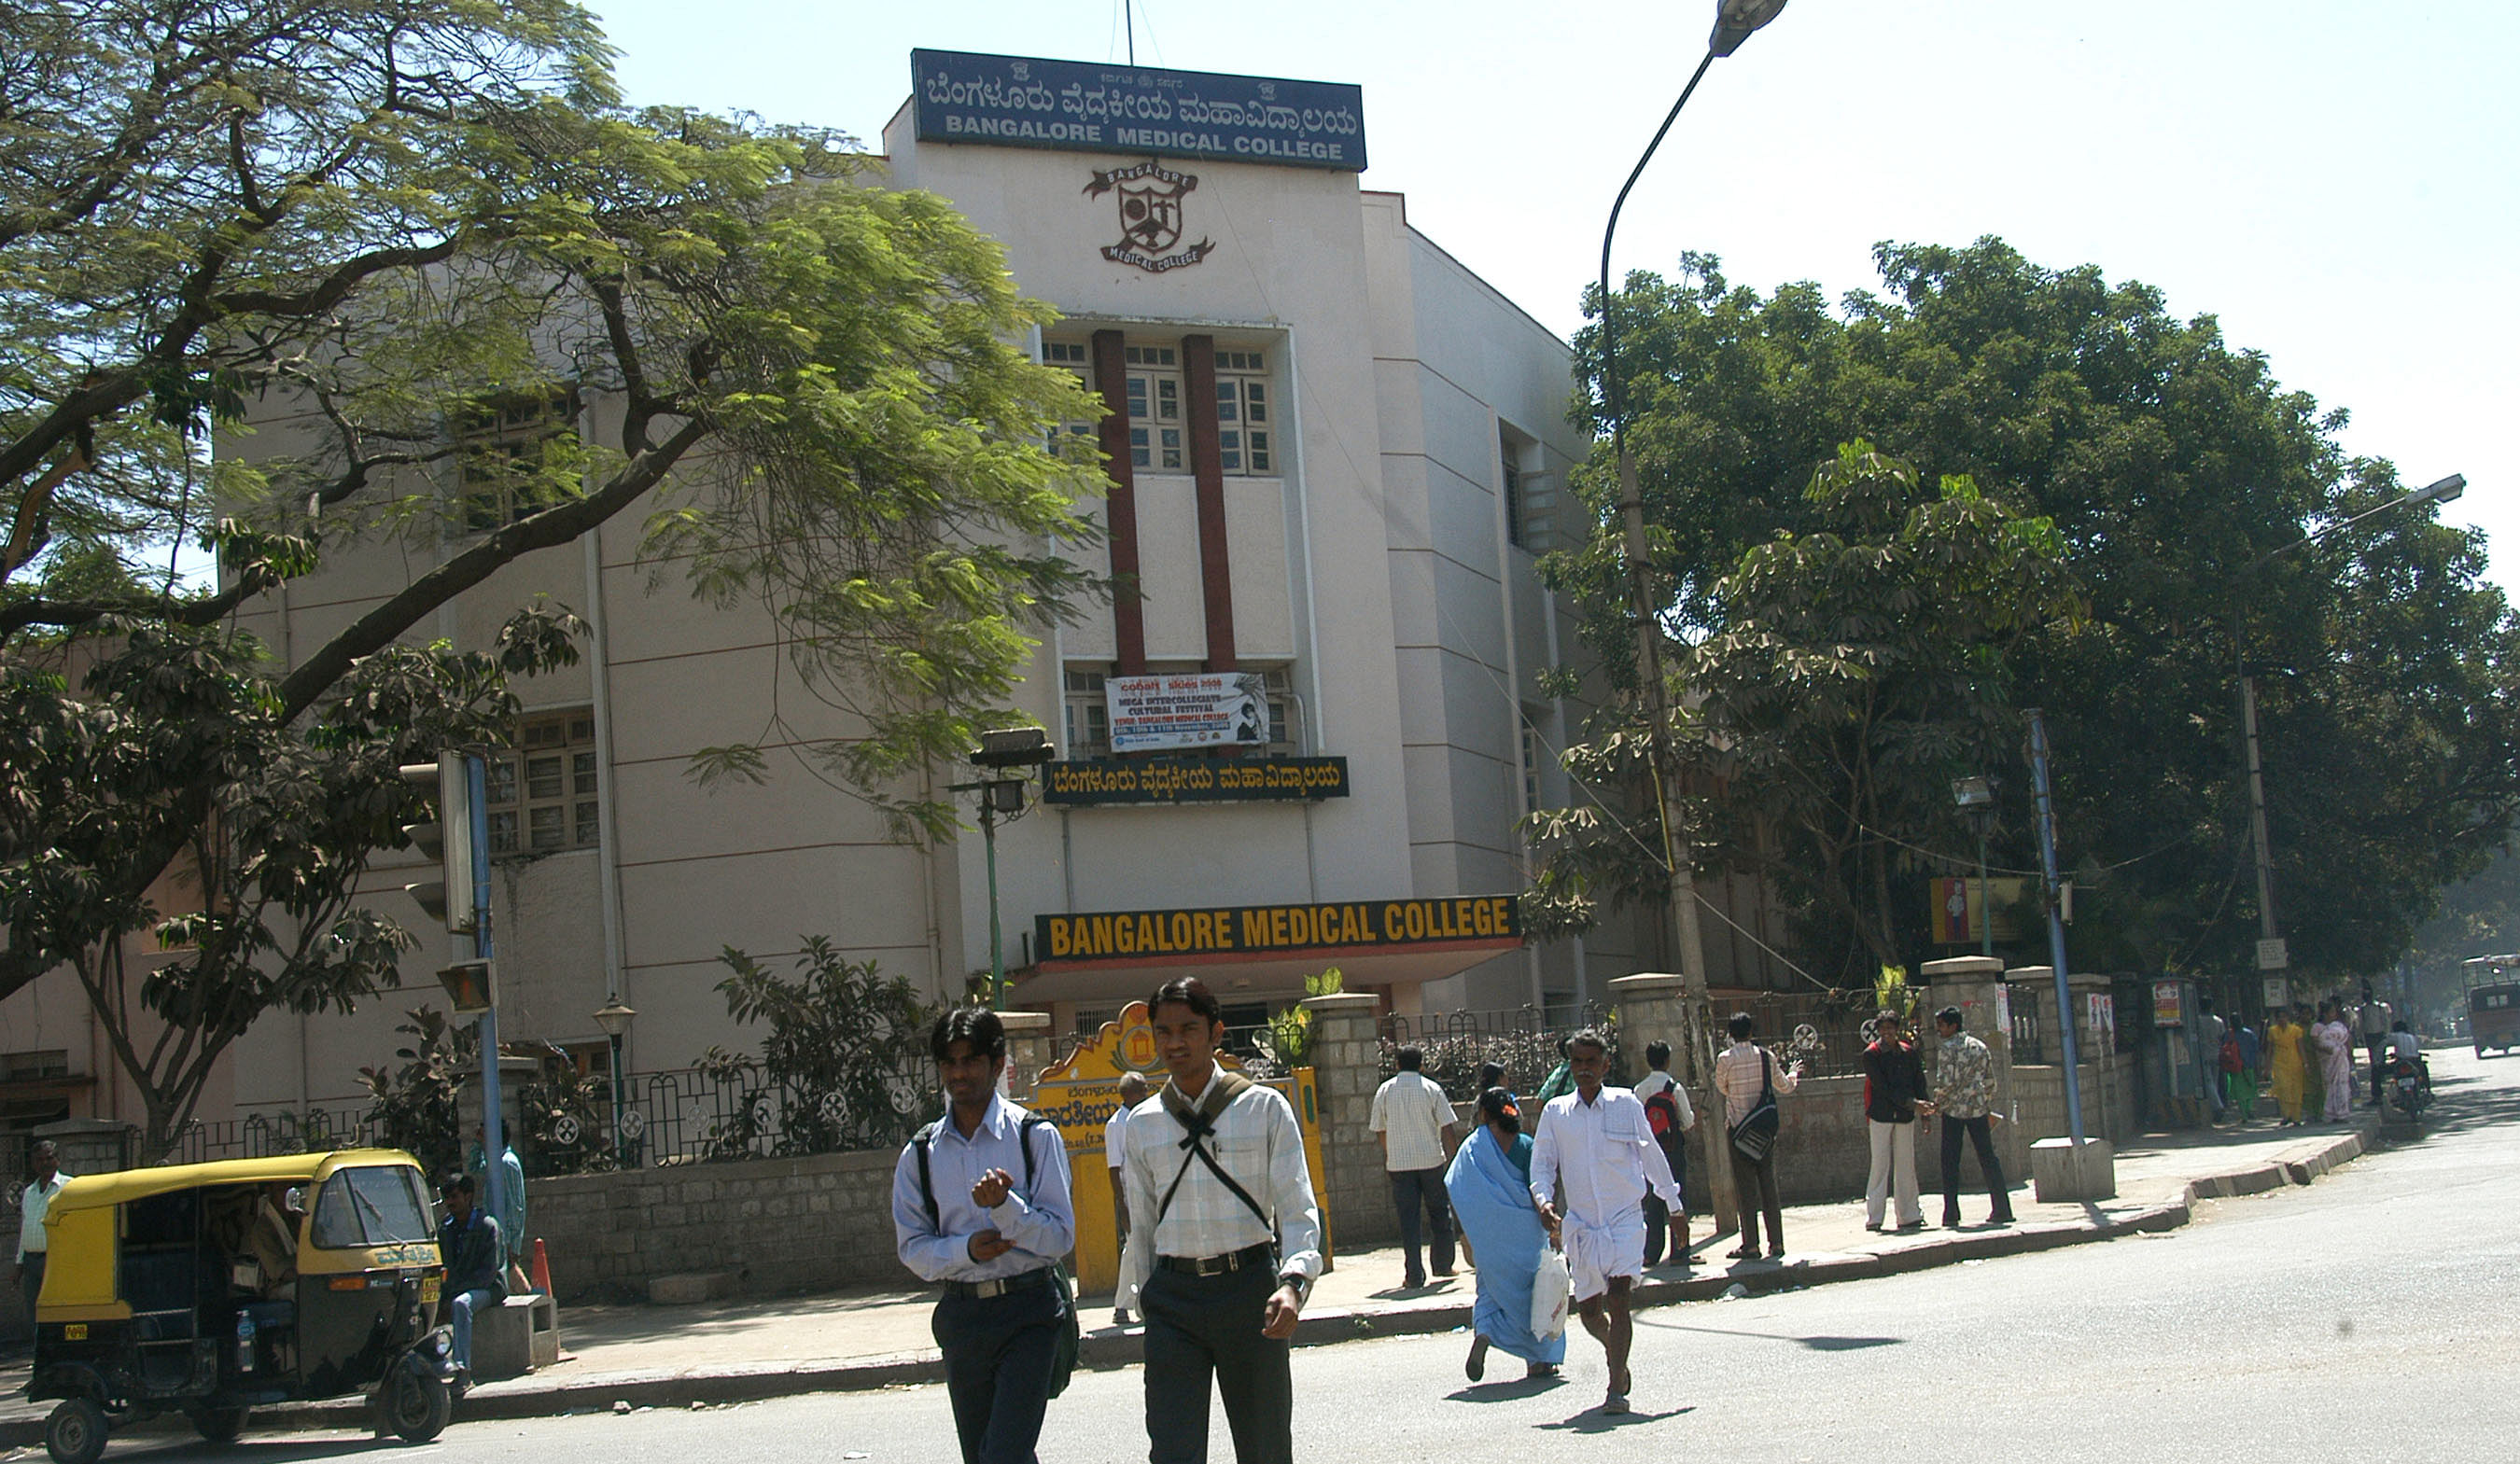 Bangalore Medical College and Research Institute (BMCRI), a premier government medical college, has been running a postgraduate degree course without recognition for the past 10 years. File photo